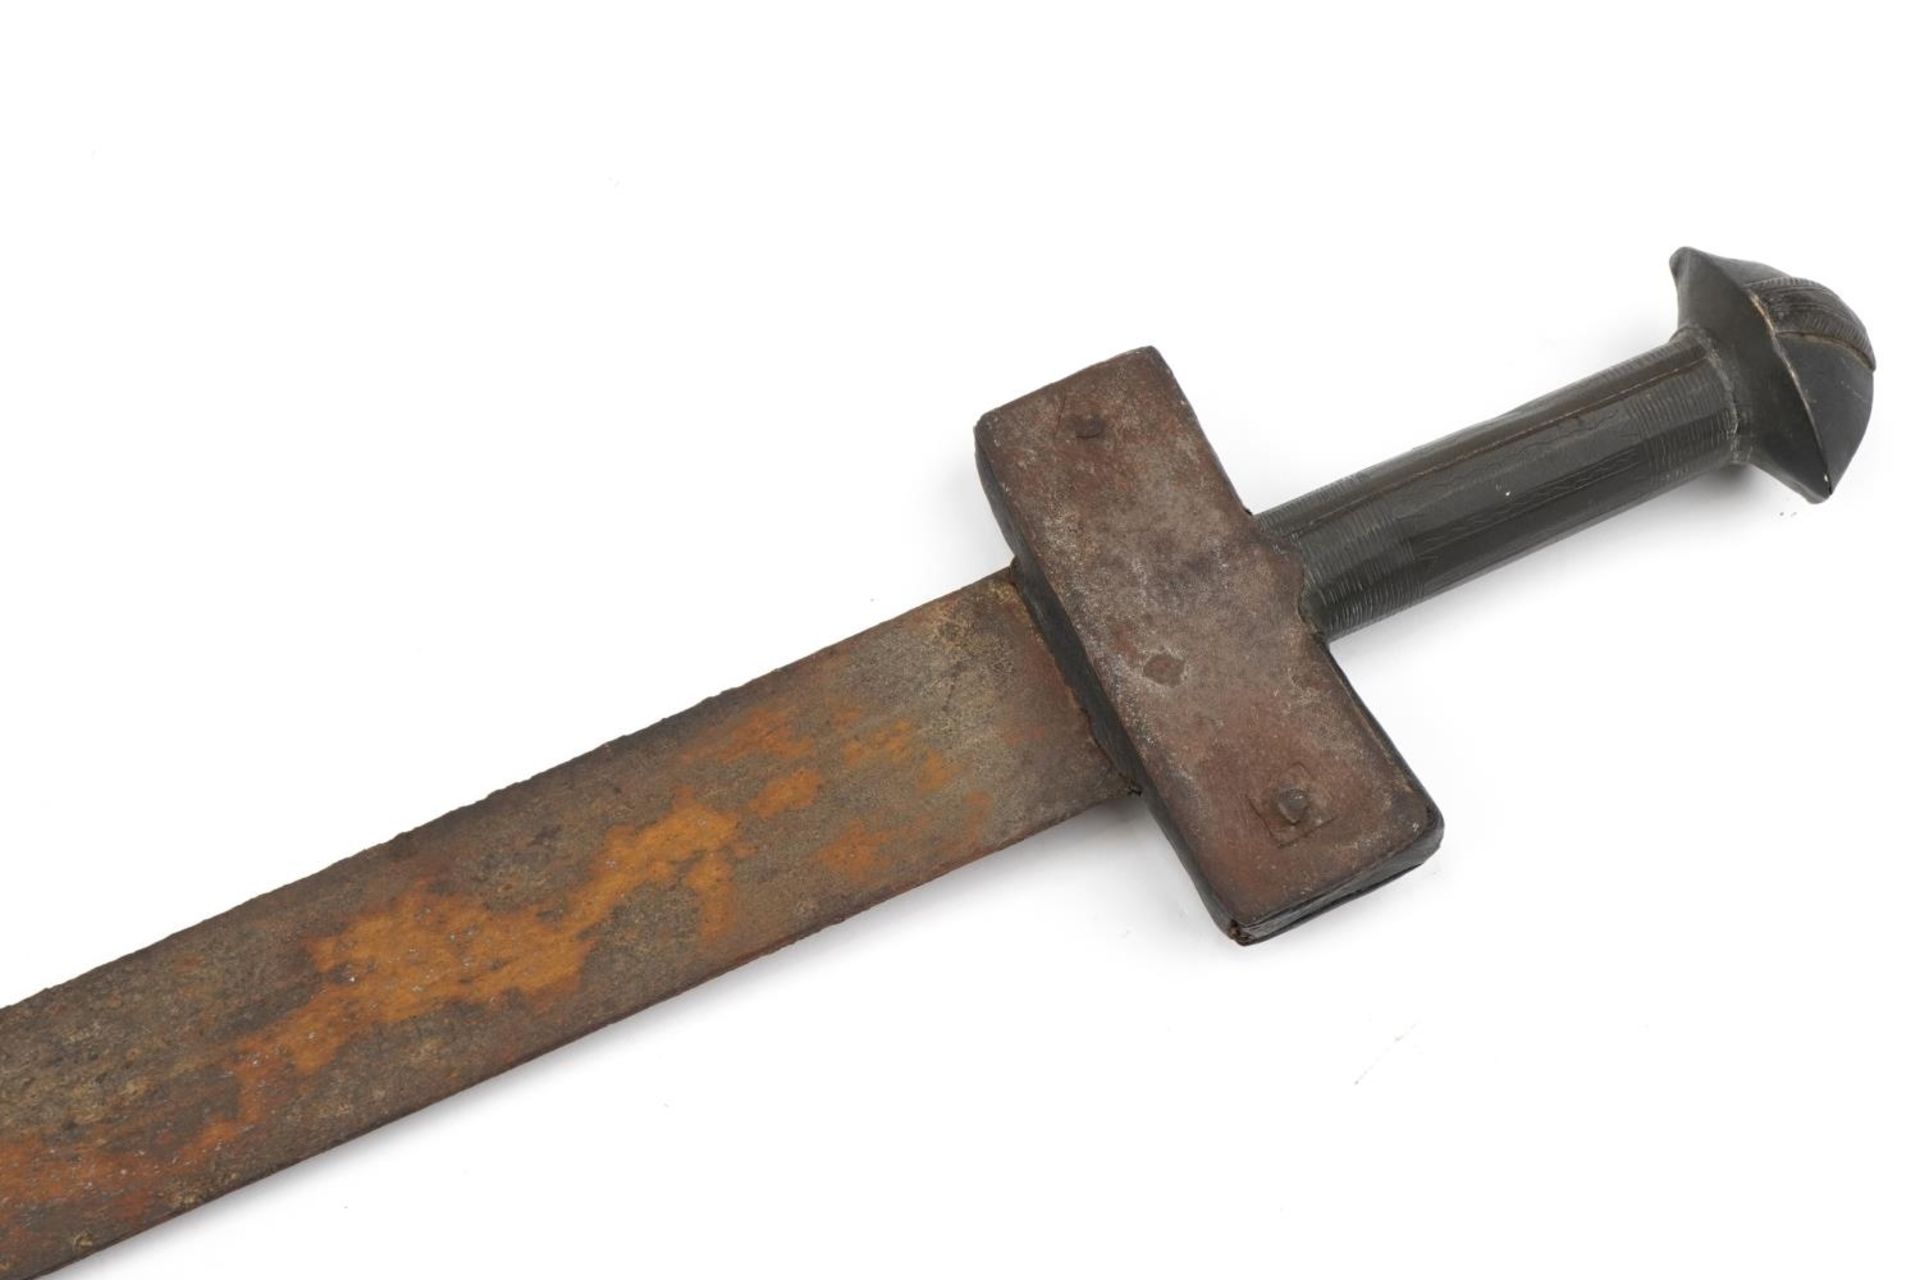 Antique sword with engraved pommel, possibly Moorish, 98.5cm in length